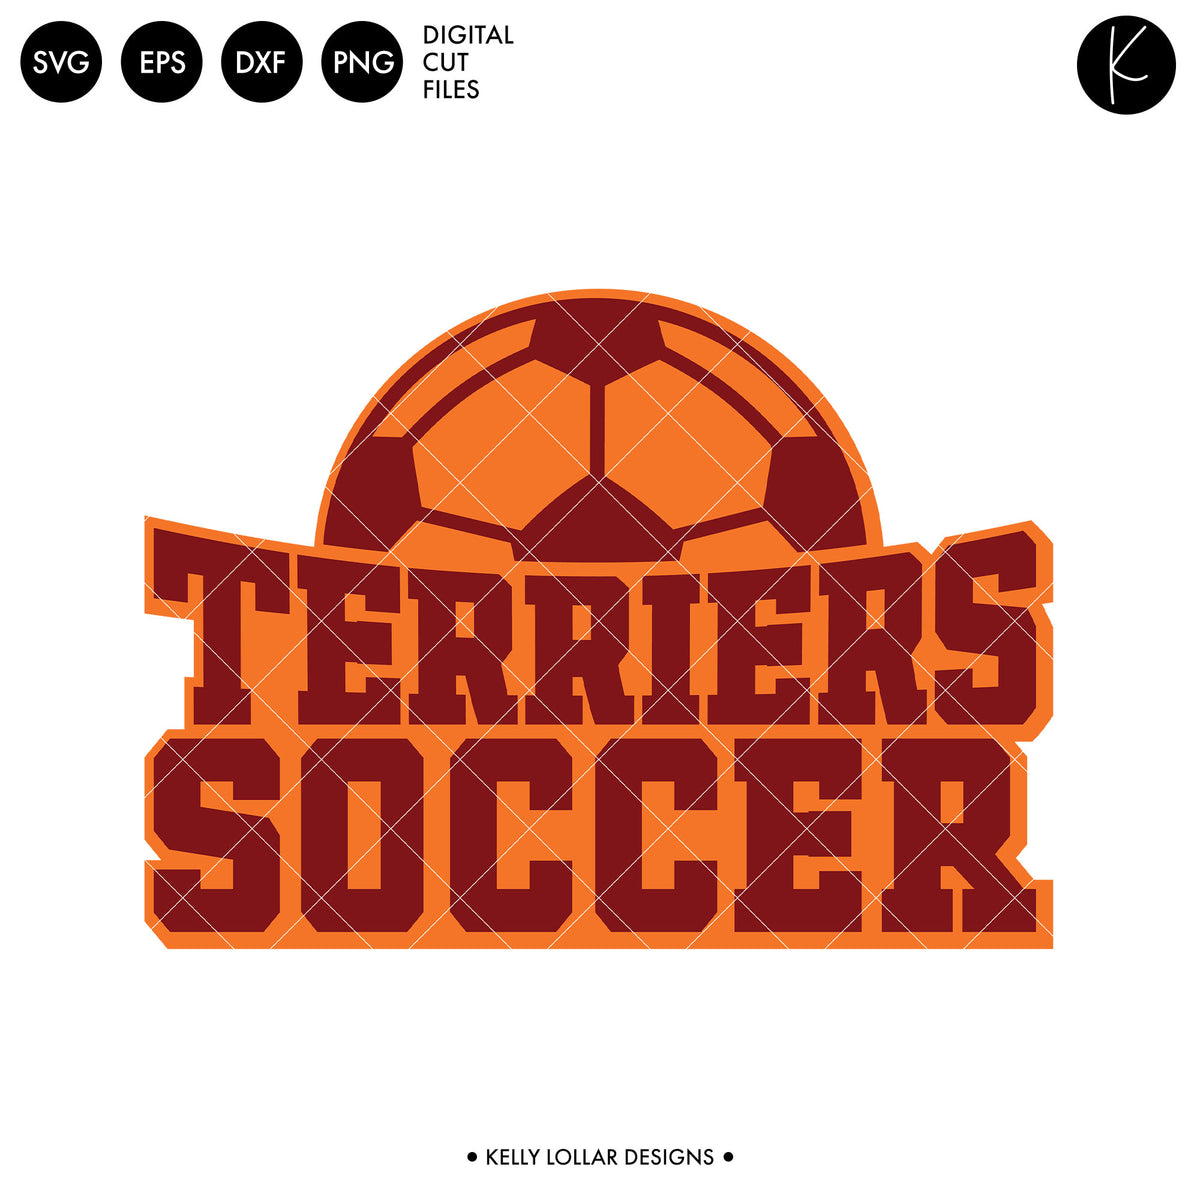 Terriers Soccer and Football Bundle | SVG DXF EPS PNG Cut Files